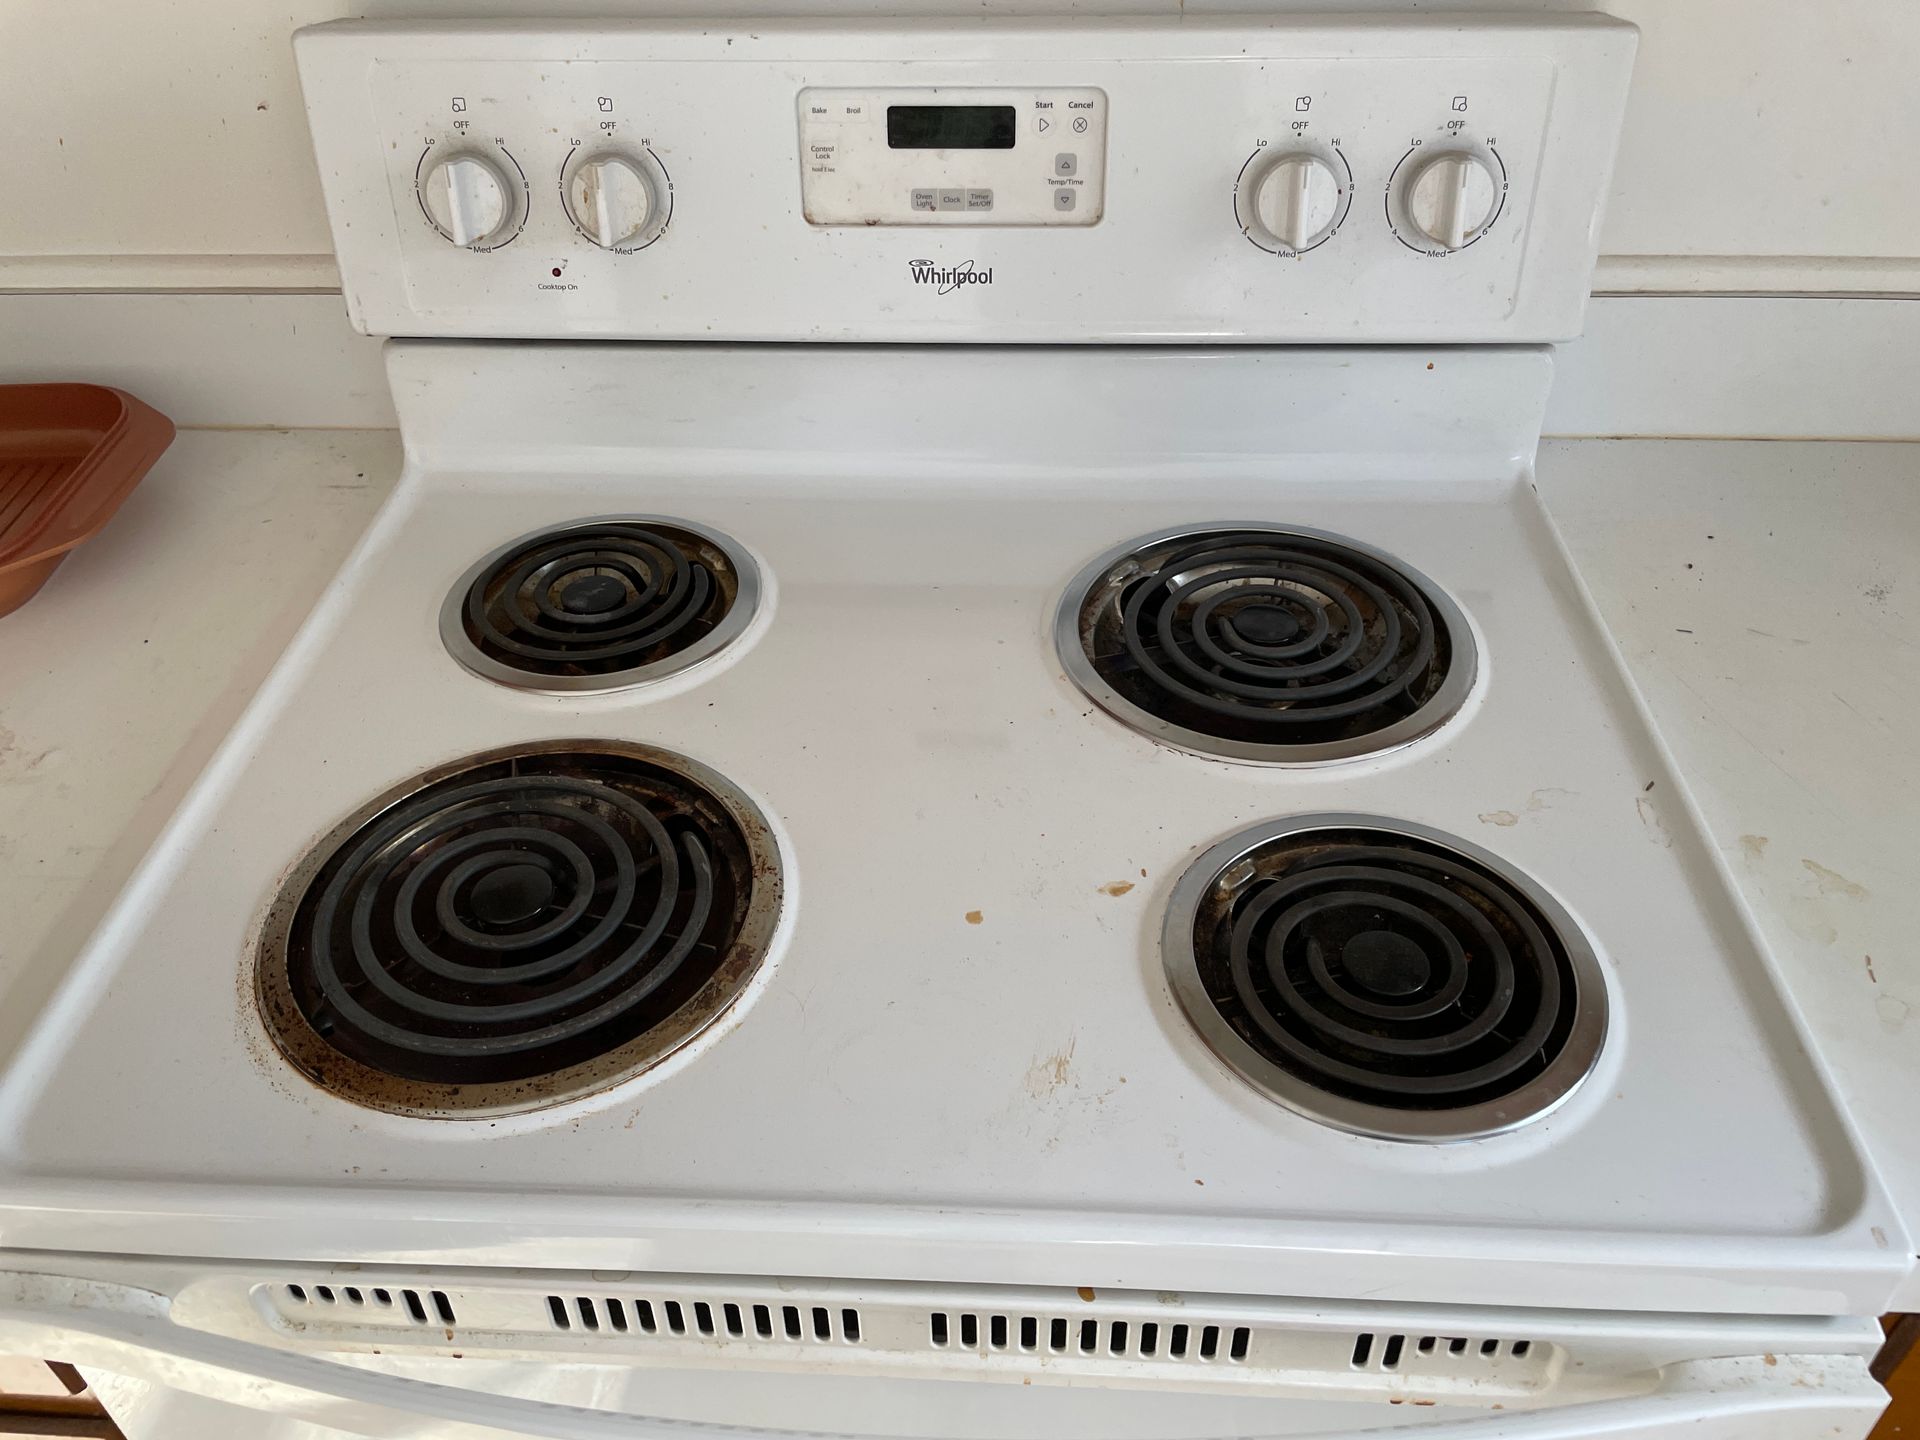 Stove top before house cleaning